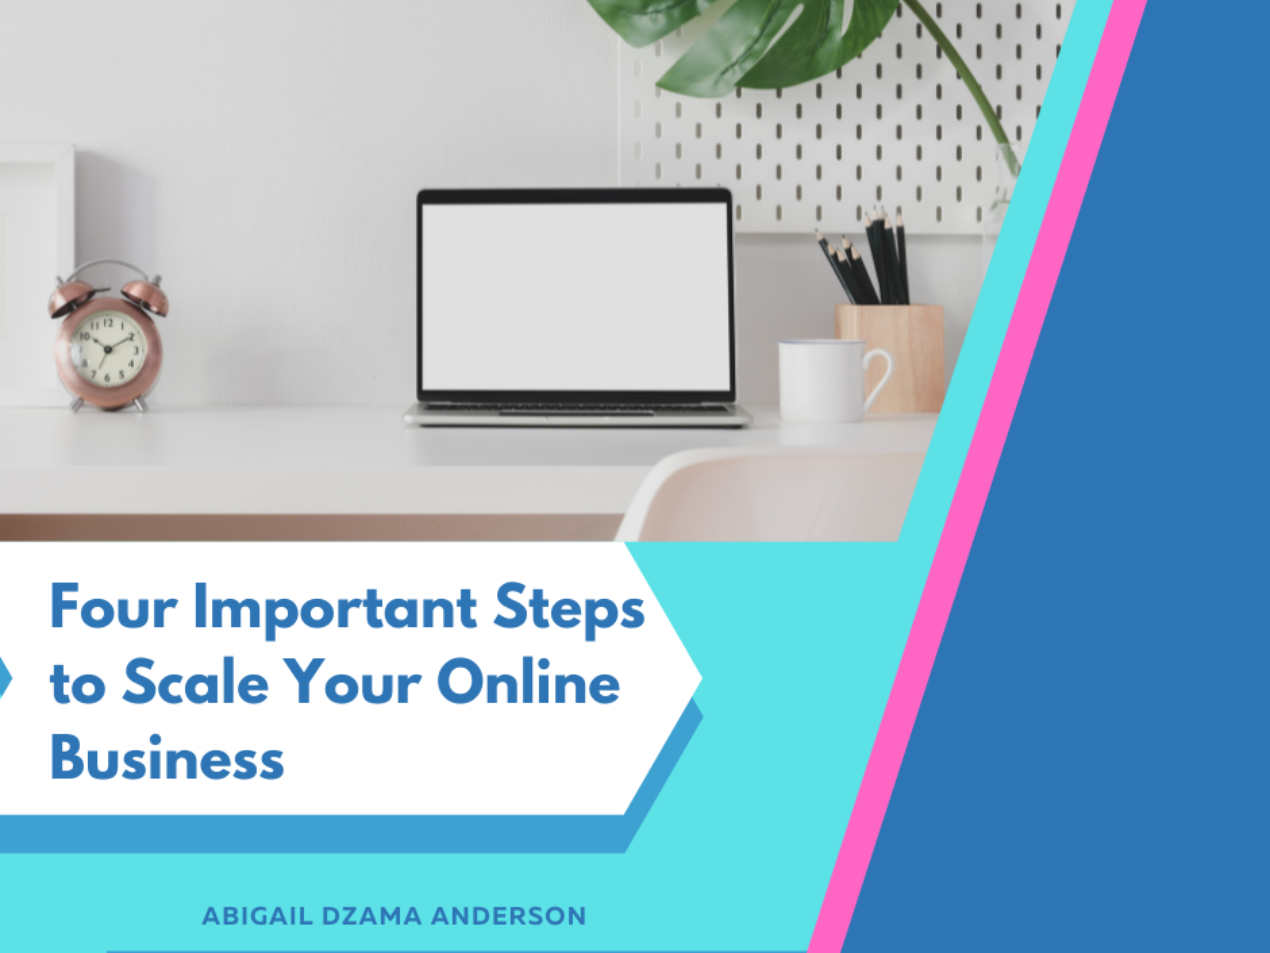 Four Important Steps to Scale Your Online Business